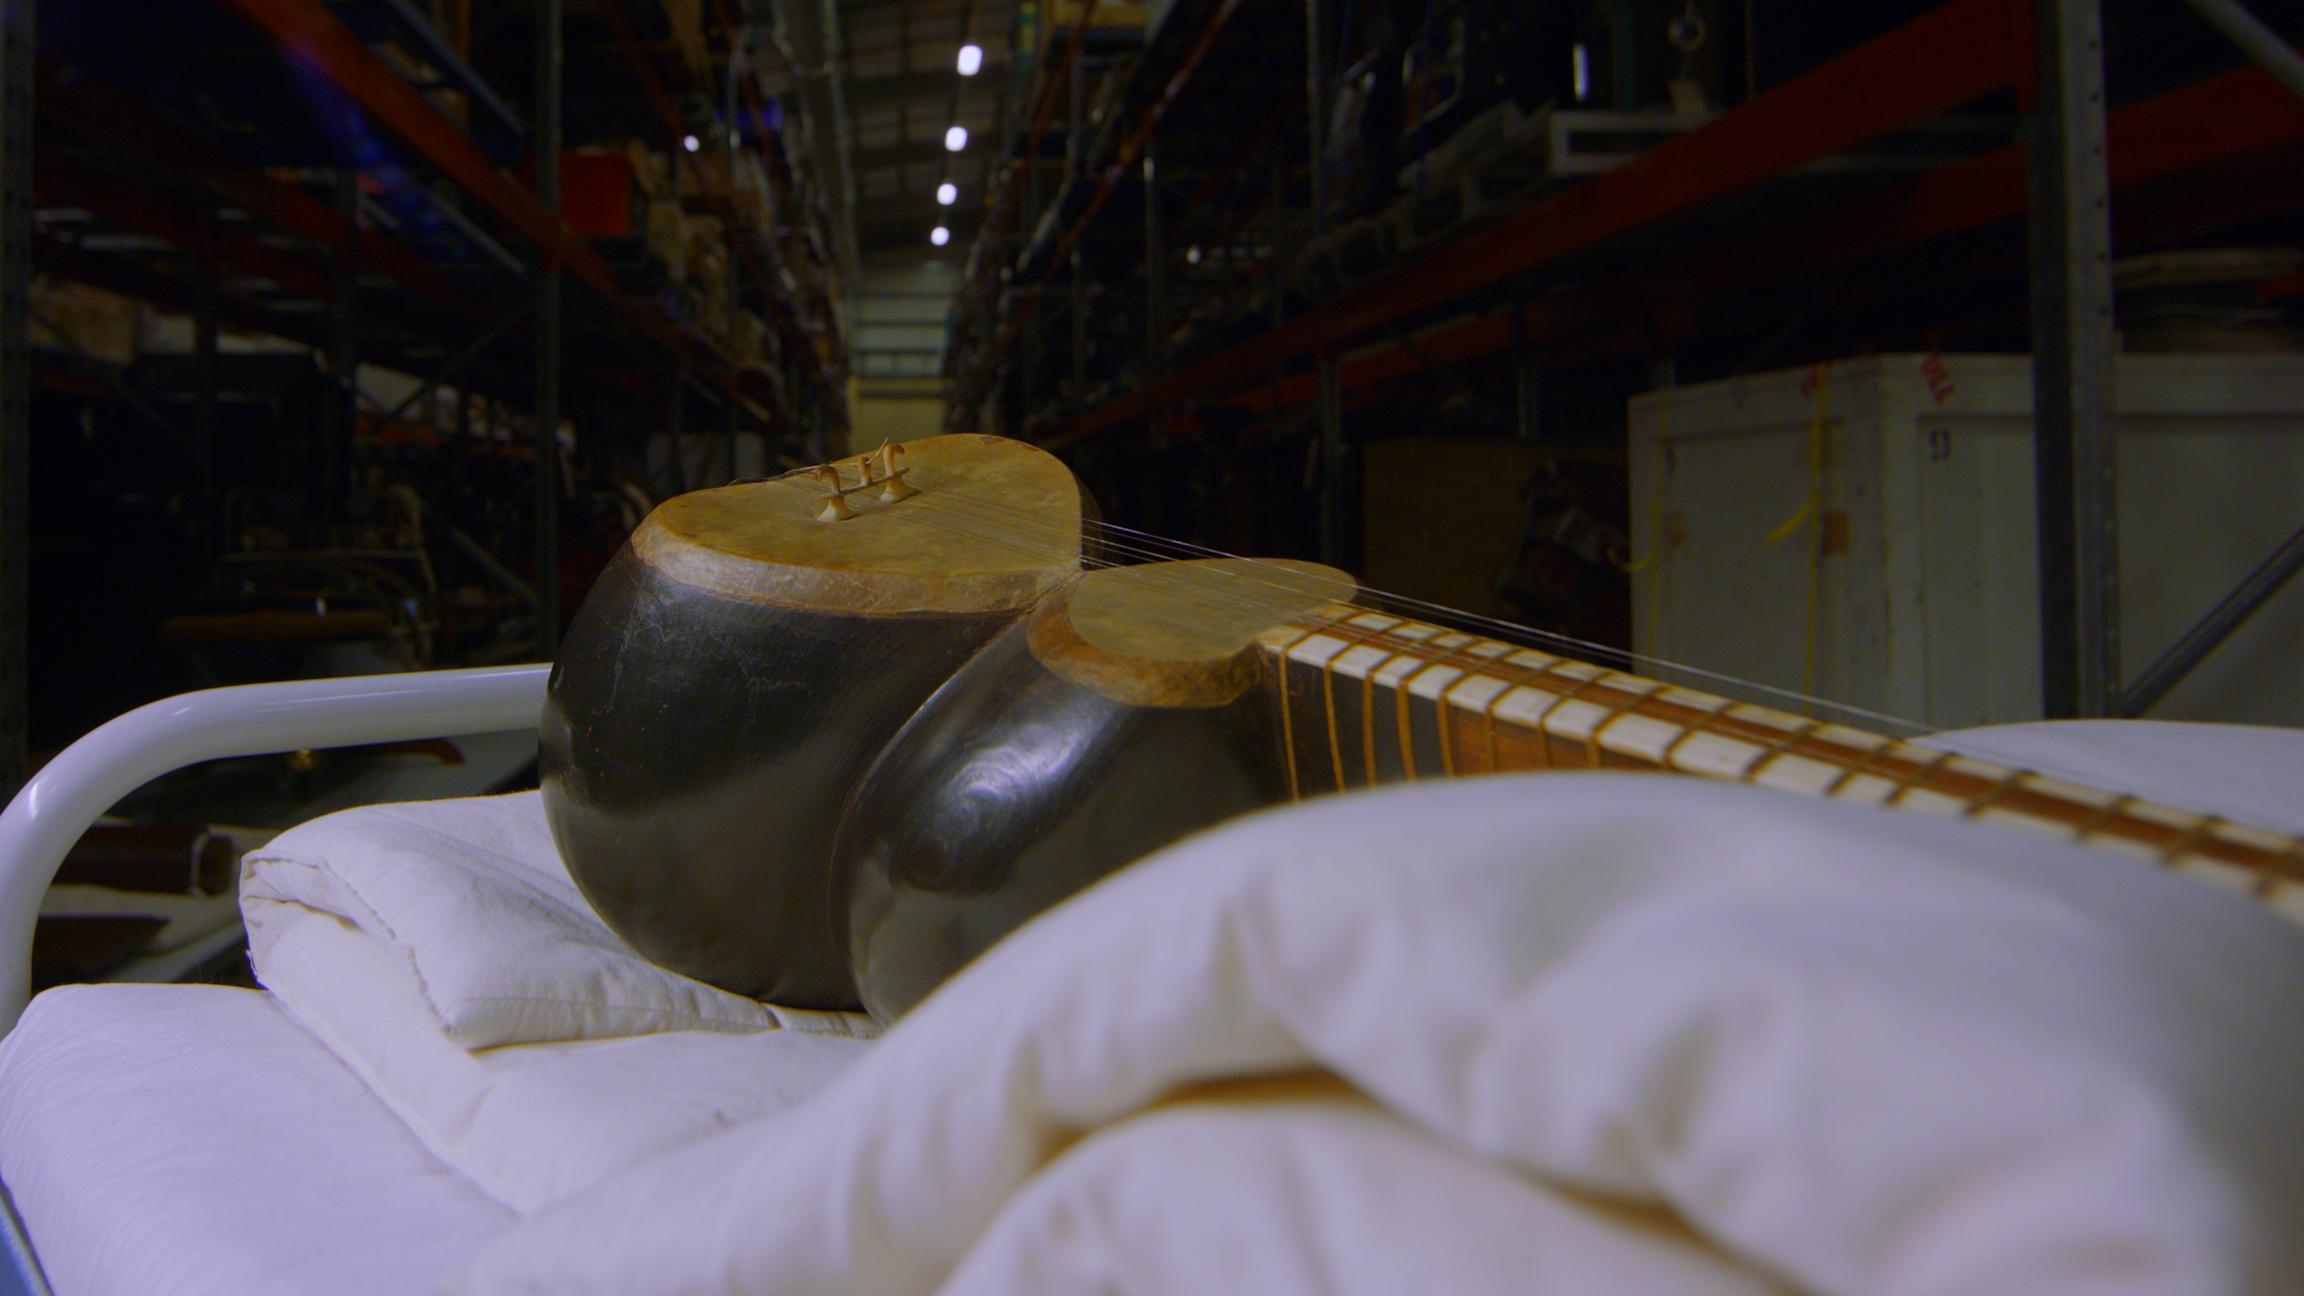 A close-up of the Persian tar musical instrument sitting on a trolley in a storeroom.